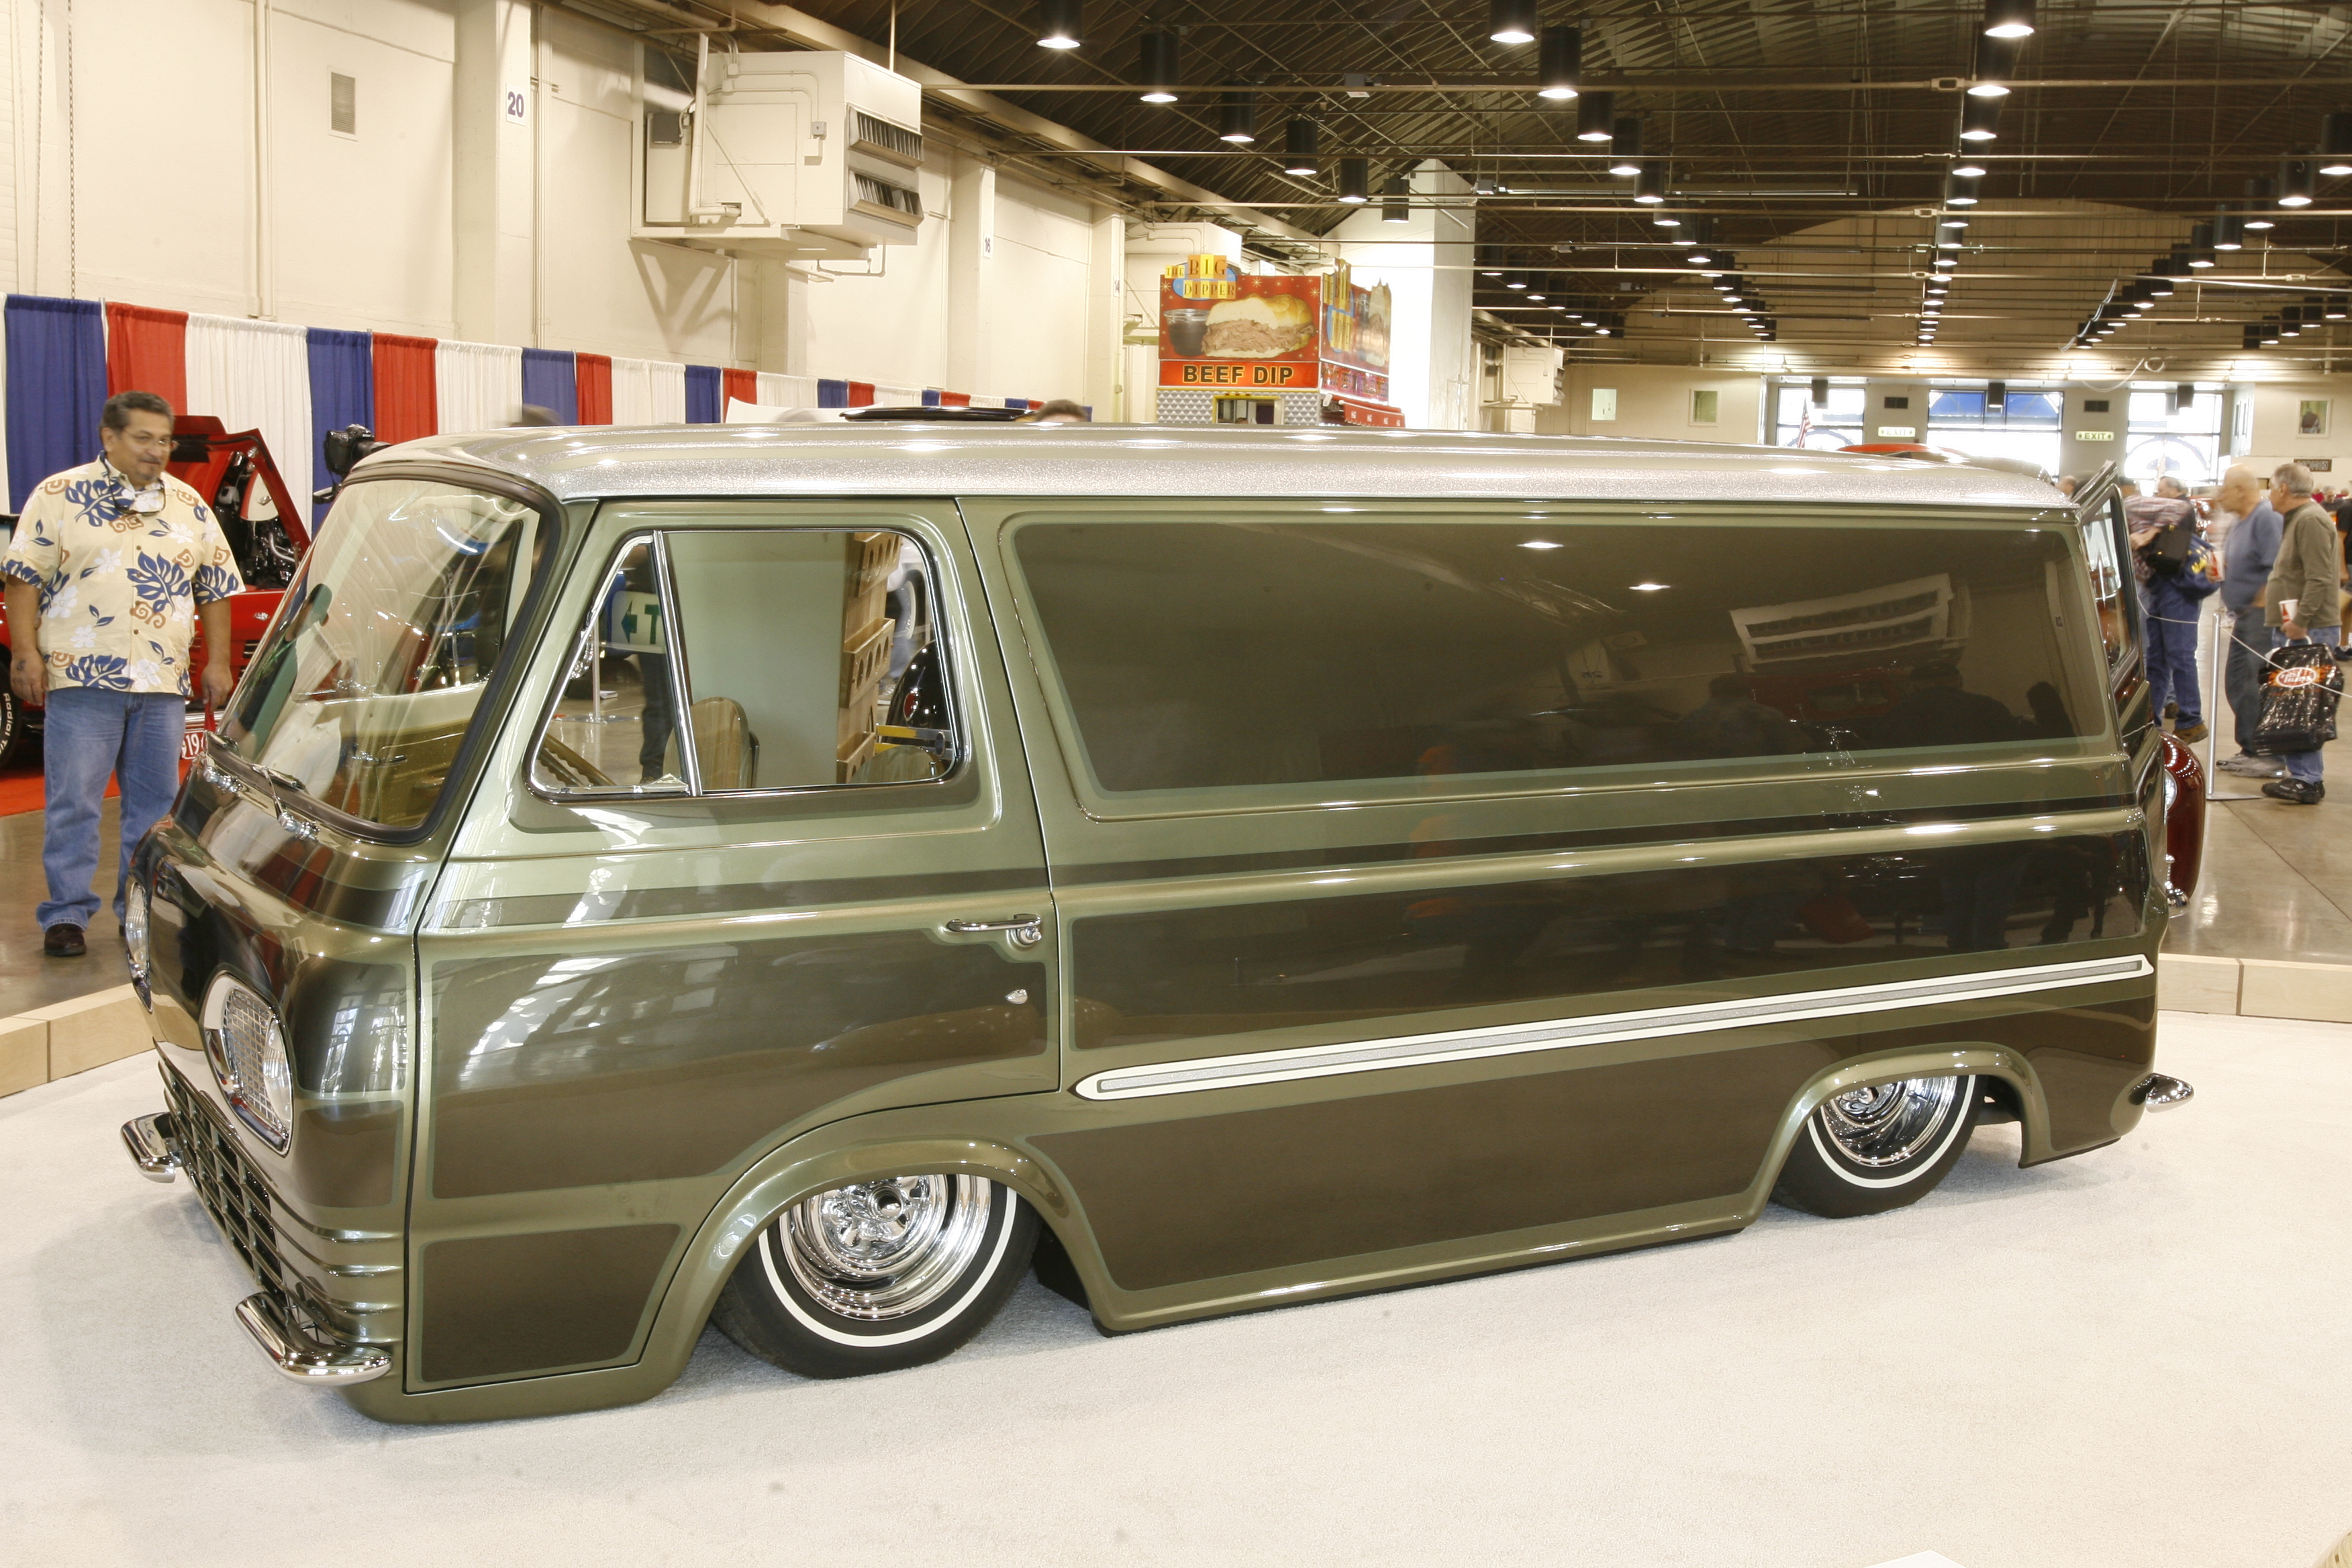 Vehicles Lowrider HD Wallpaper | Background Image